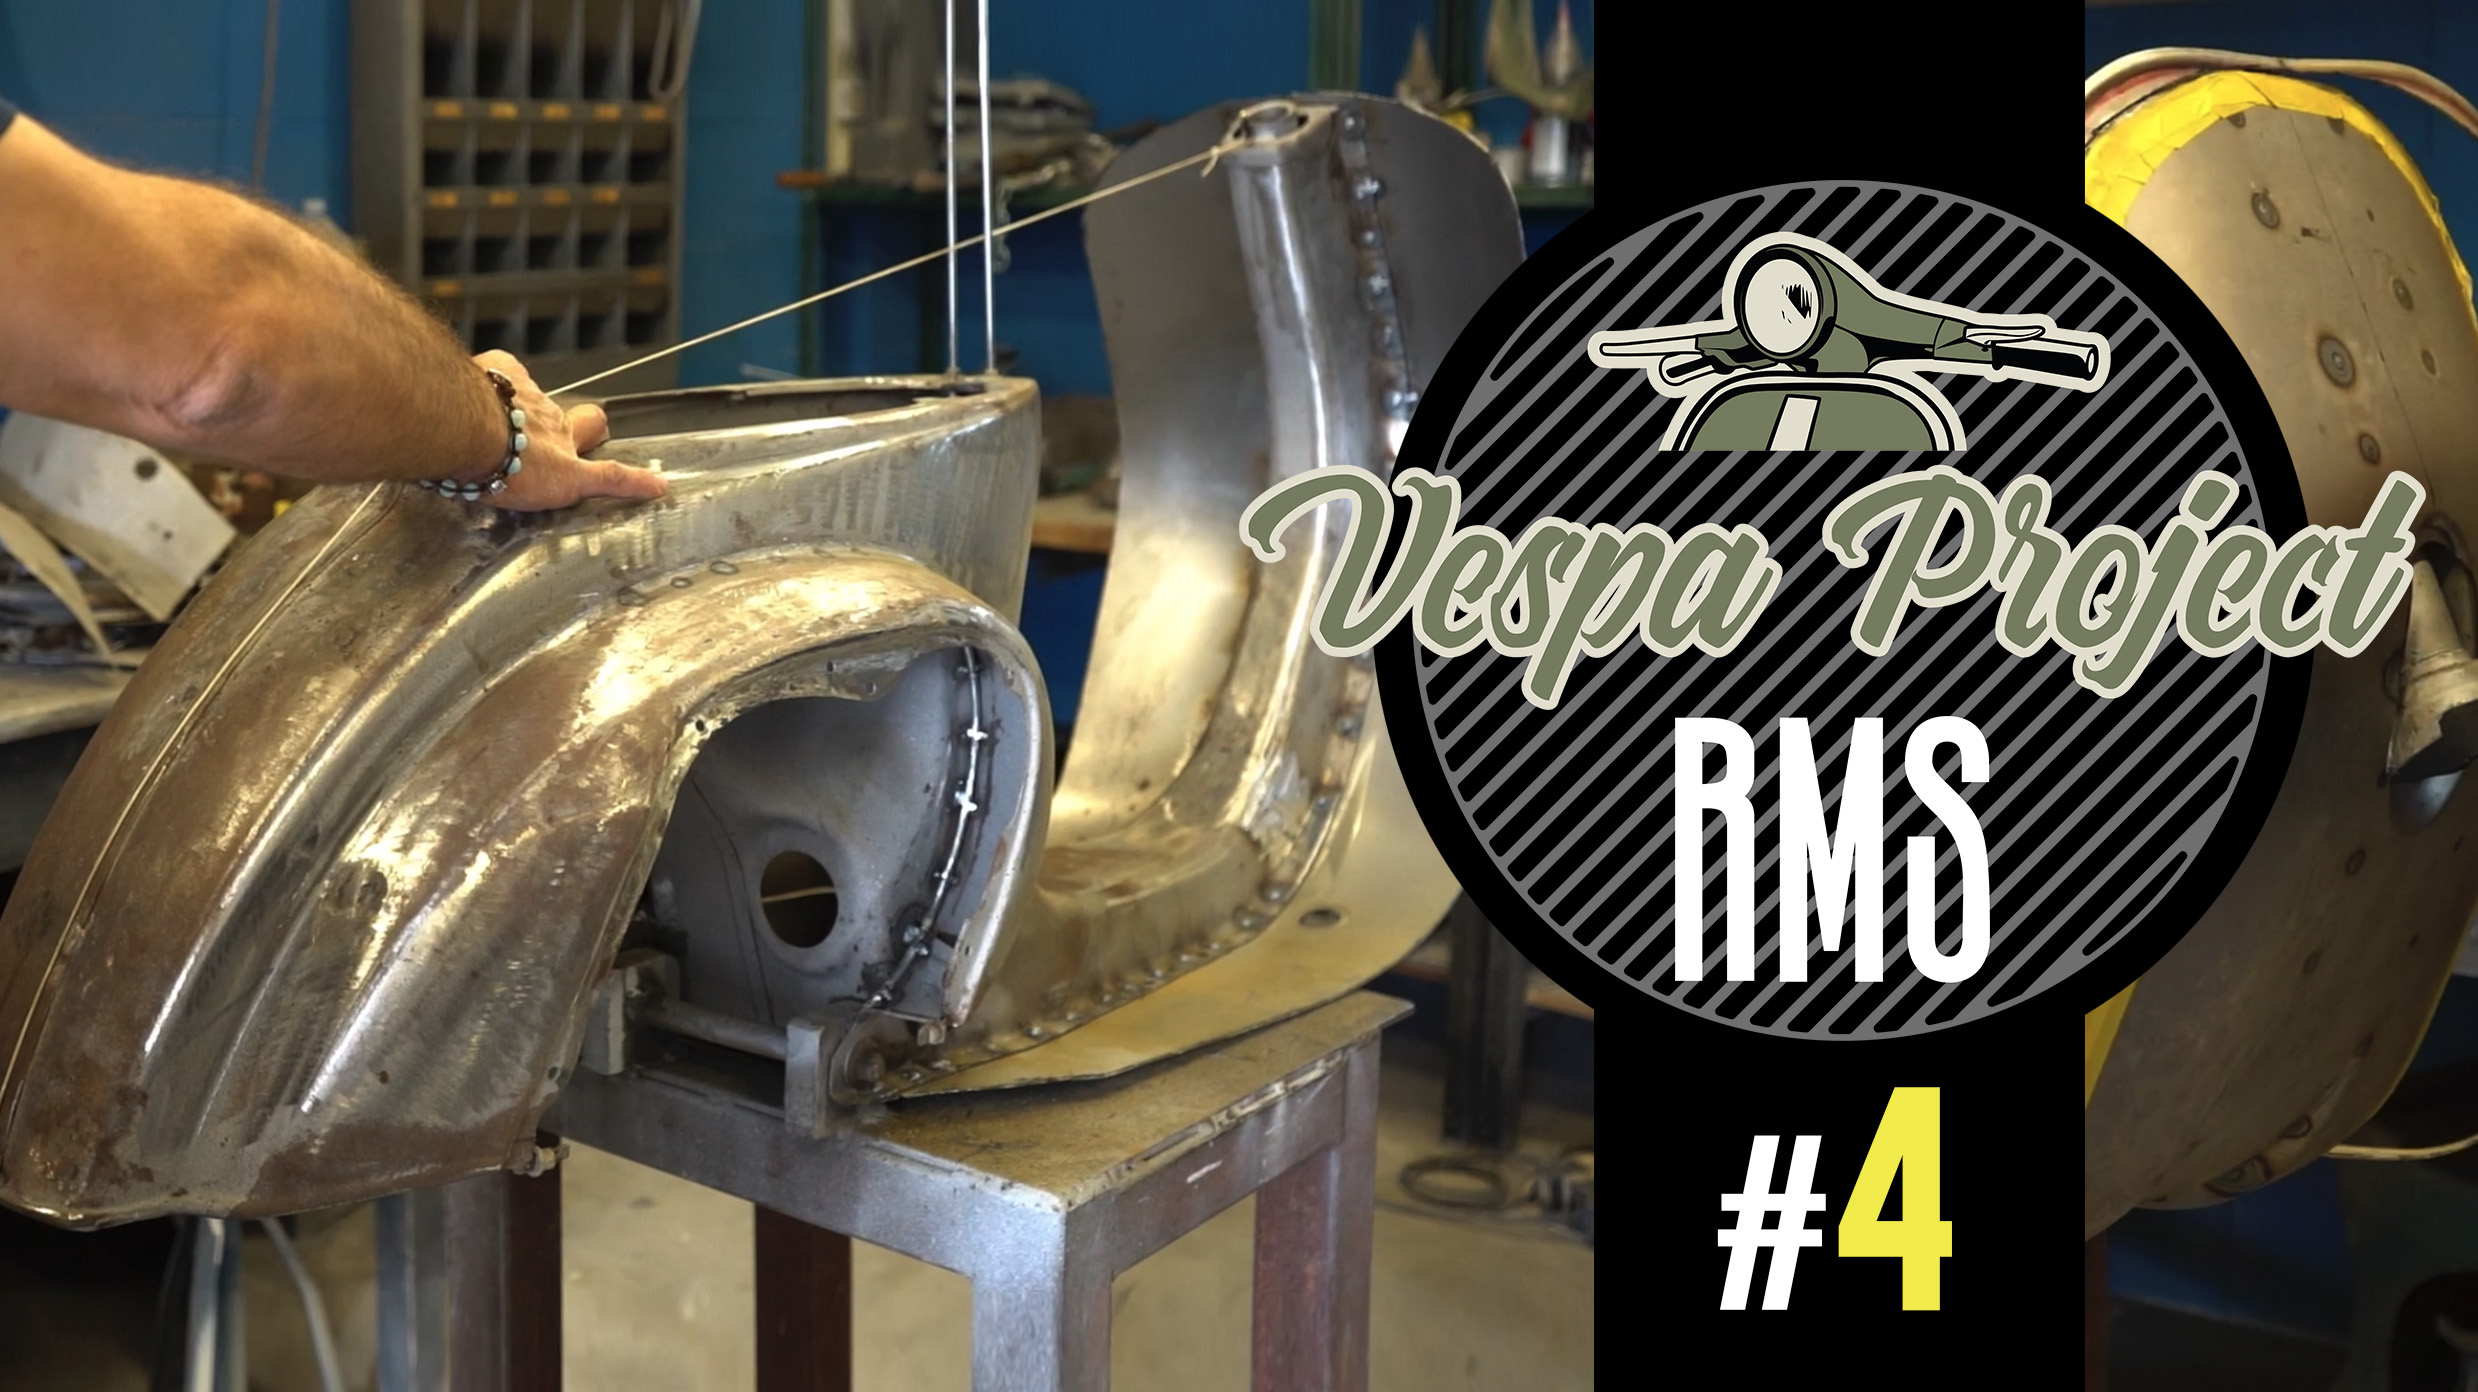 Episode 4 of the Vespa Project is online!